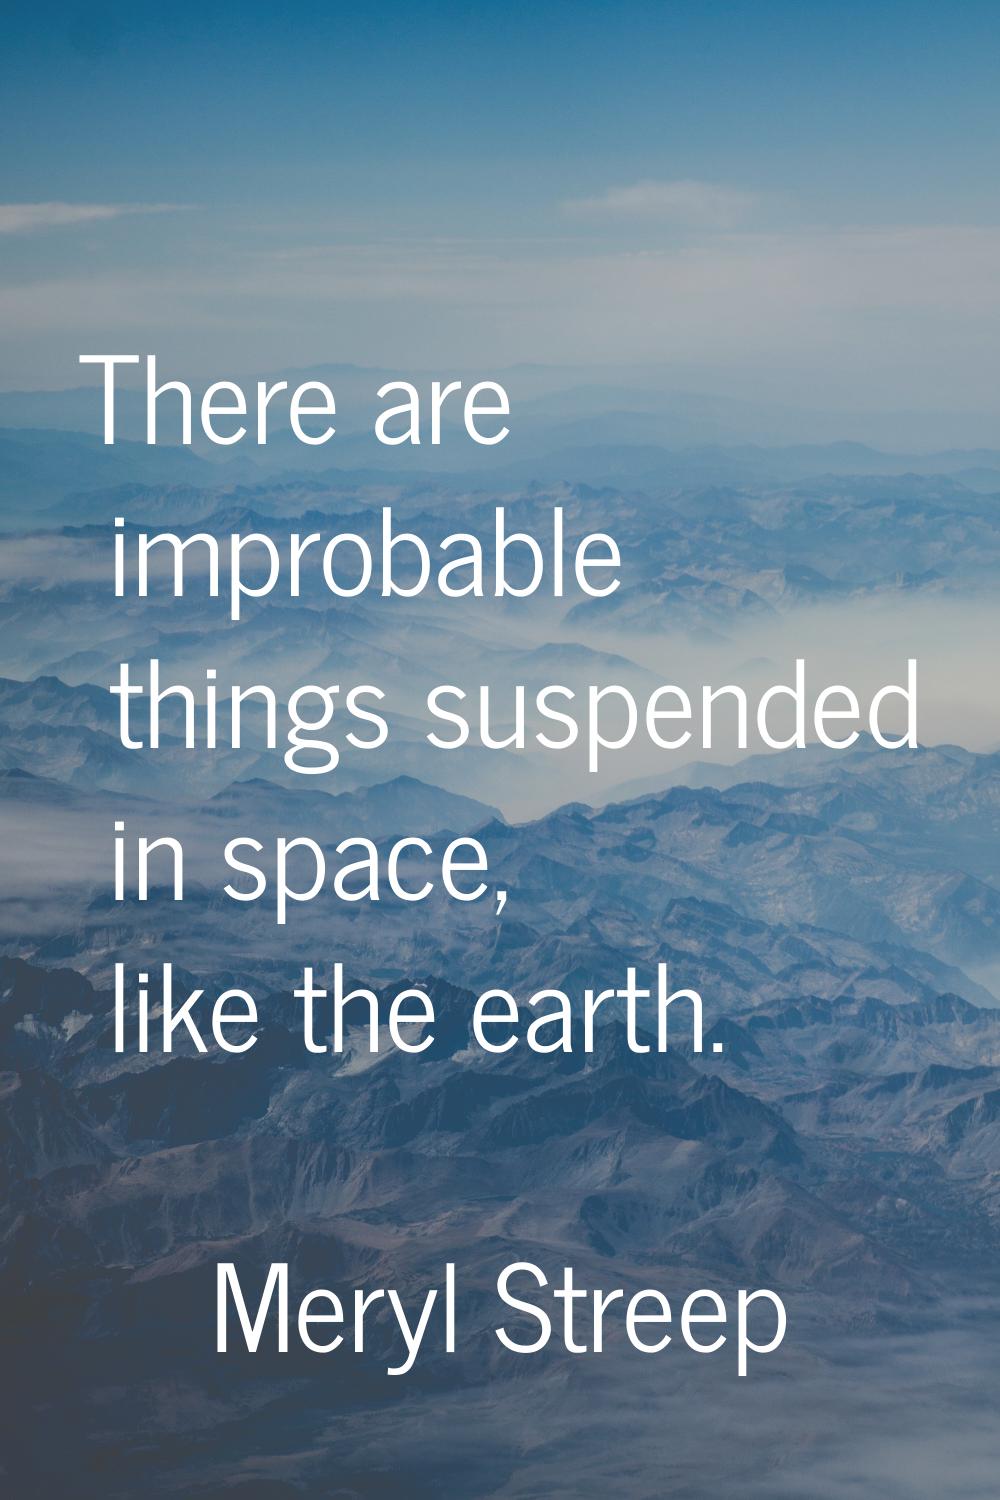 There are improbable things suspended in space, like the earth.